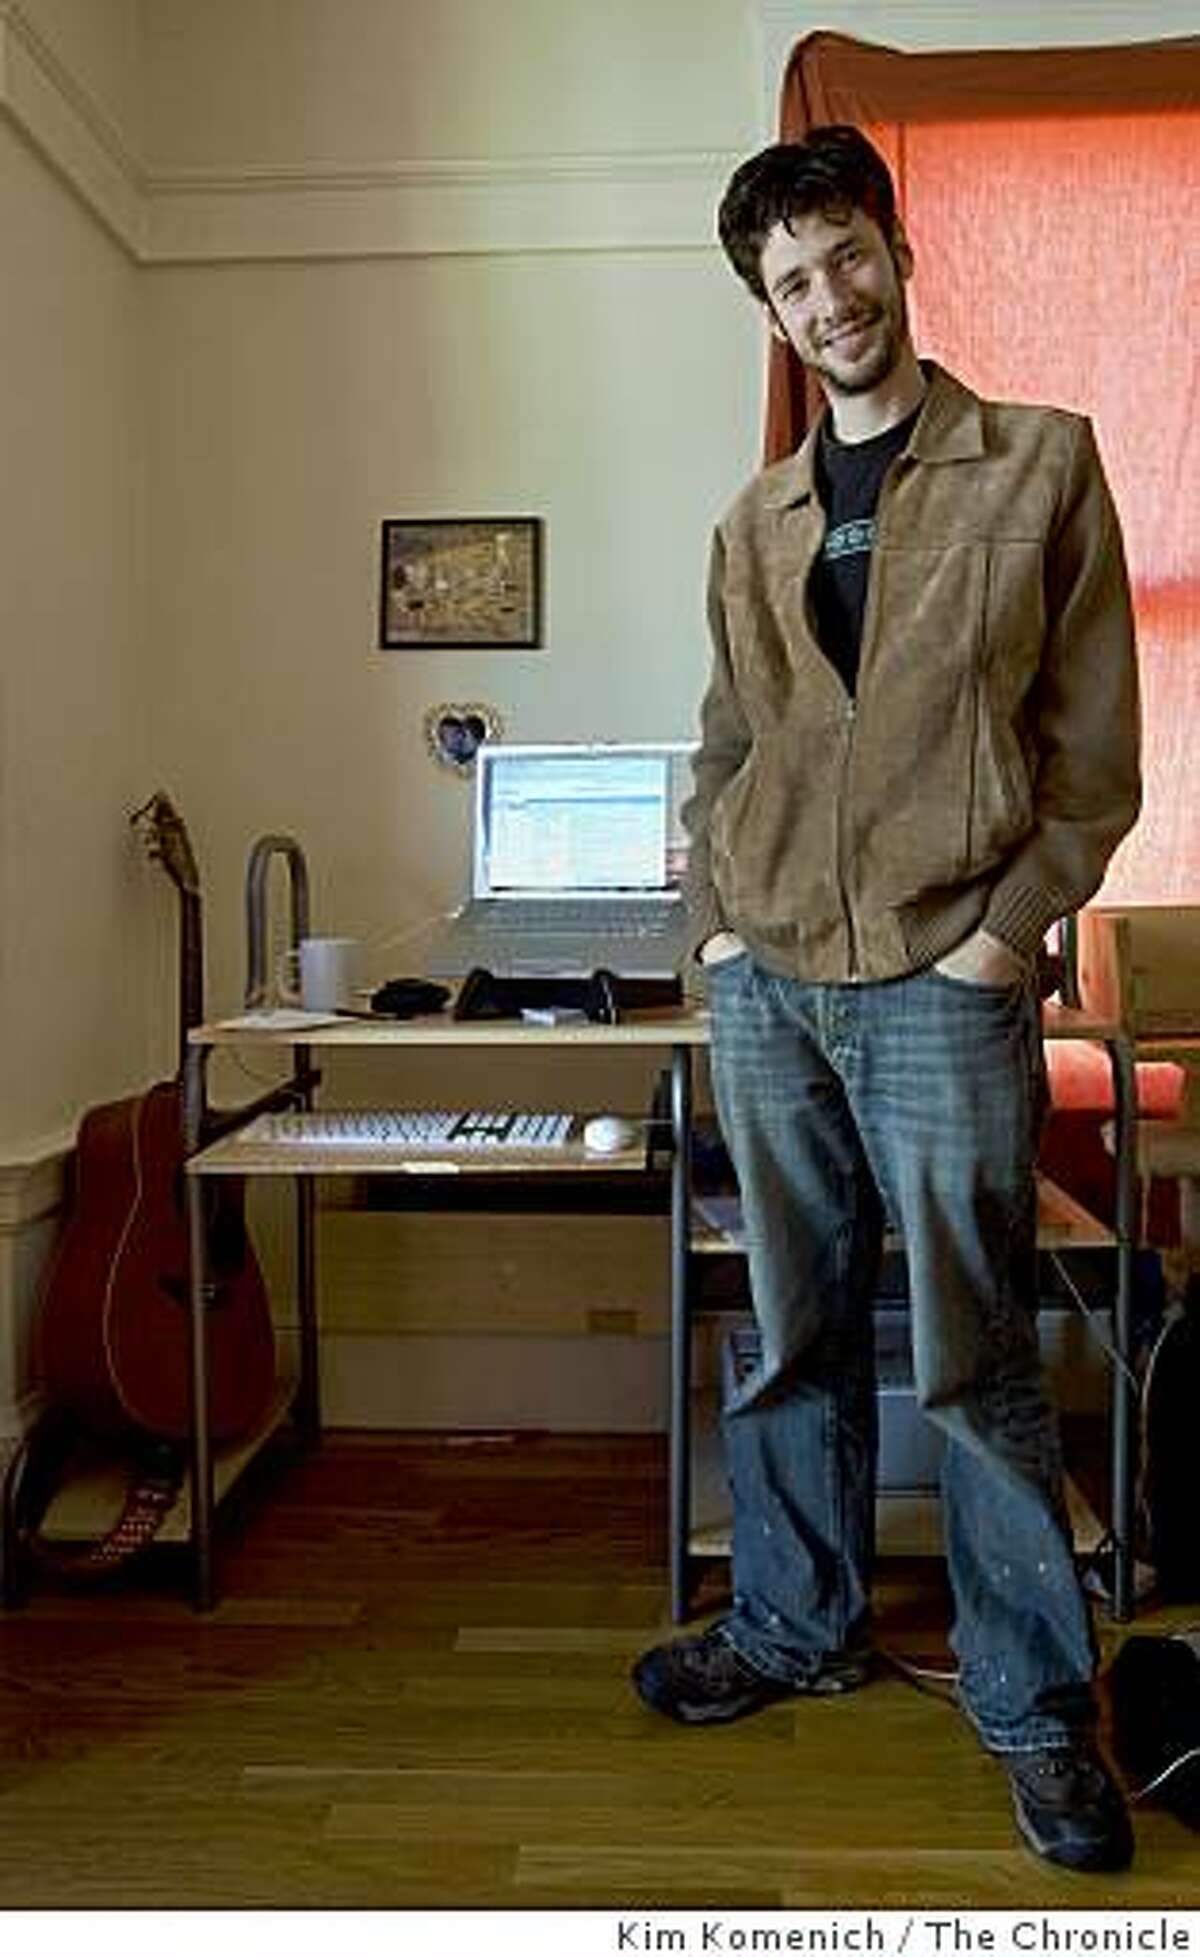 Web entrepreneur David Cohn stands in his home office in San Francisco, Calif., on Tuesday, Mar. 10, 2009. Cohn received a Knight Foundation grant to launch Spot.us, a website where journalists can pitch stories to the public and solicit funding for them.